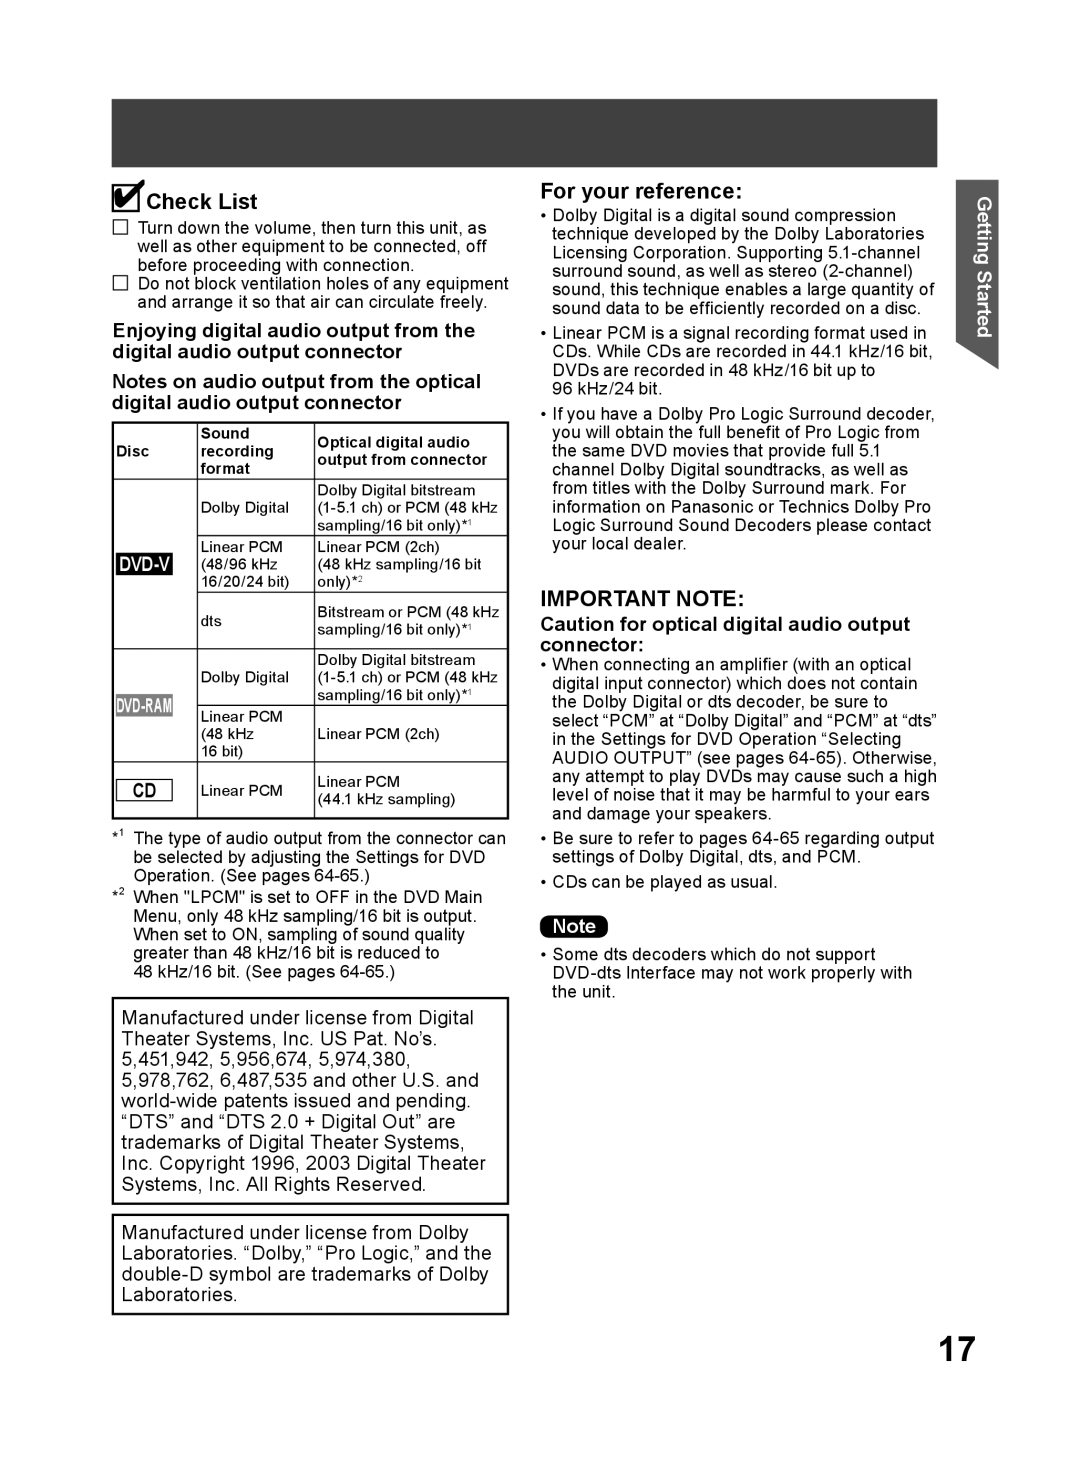 Panasonic PV DF2704 Check List, For your reference, Important Note, Caution for optical digital audio output connector 